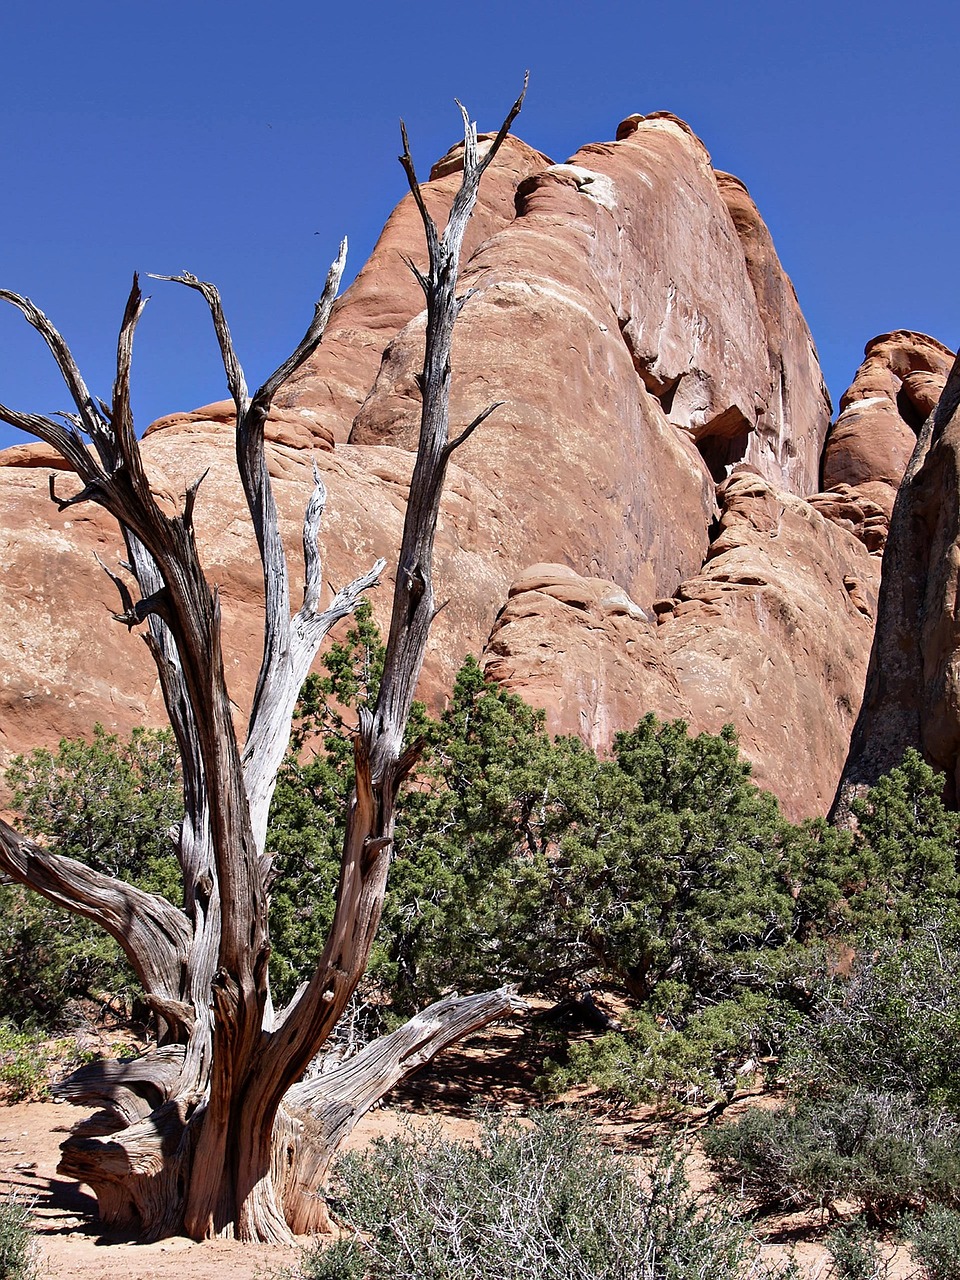 devil's garden,arches nationa park,utah,usa,erosion,tourist attraction,red,rocks,landscape,nature,free pictures, free photos, free images, royalty free, free illustrations, public domain